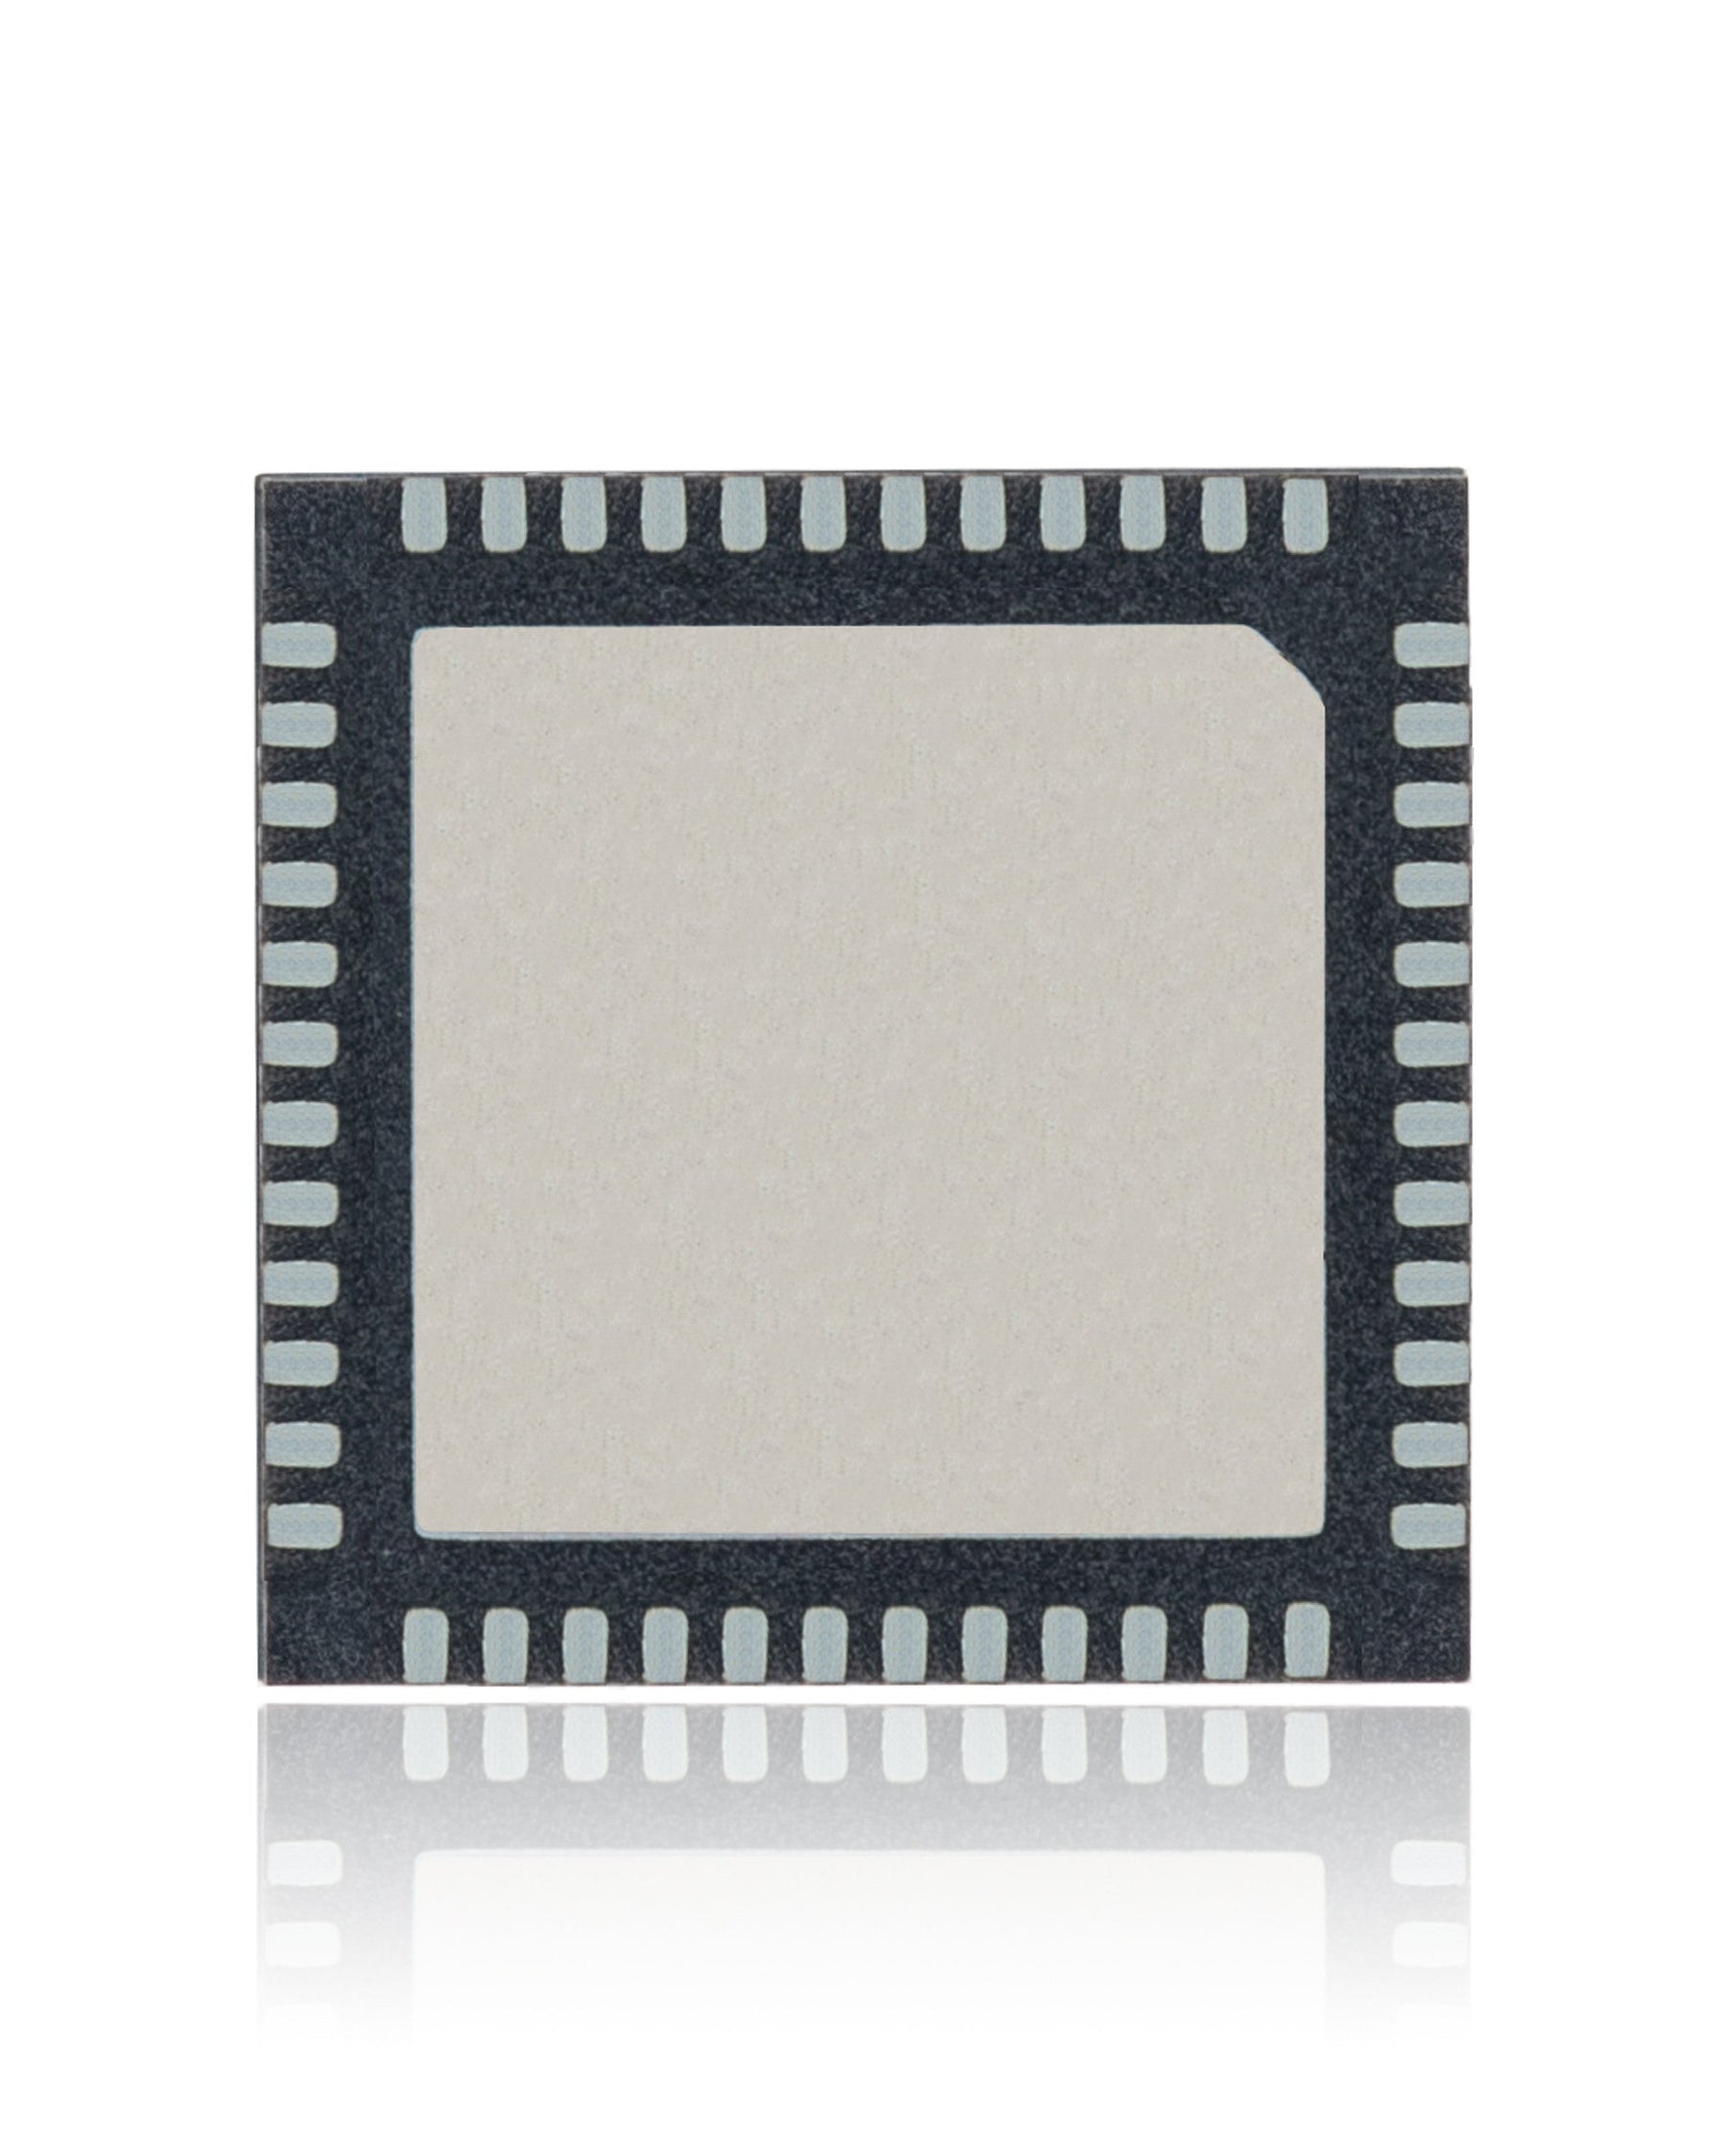 3-PHASE QUICK PWM CONTROLLER IC COMPATIBLE WITH MACBOOK PRO (MAXIM: MAX15119GTM / MAX15119: QFN-48 PIN